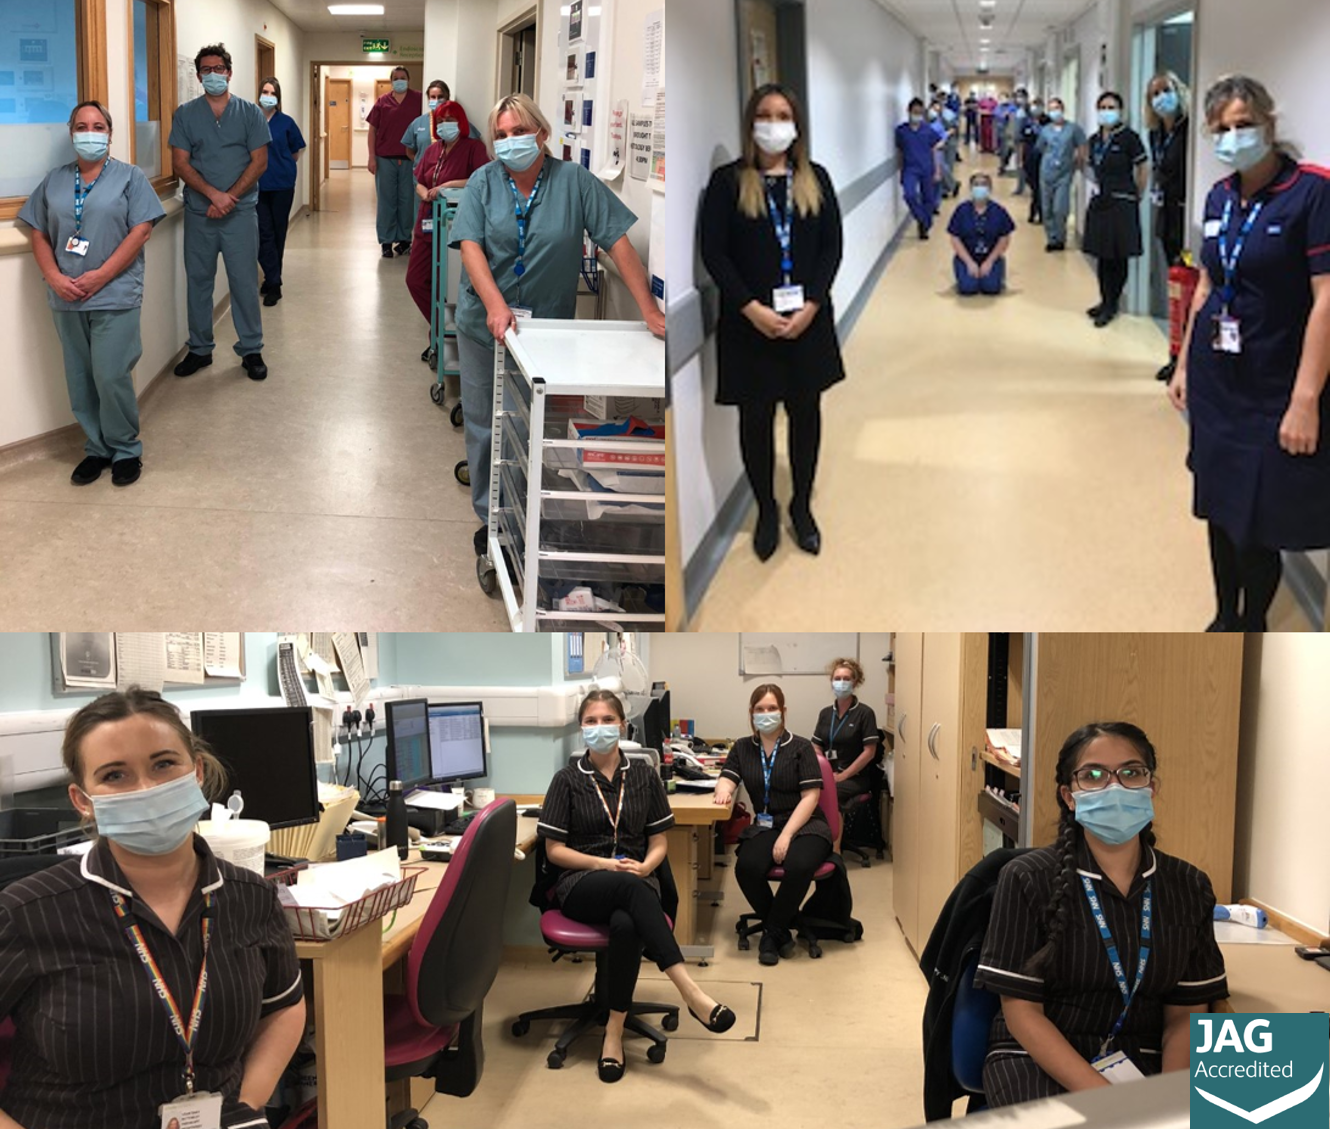 medical staff collage showing masked colleagues sat down and in corridors